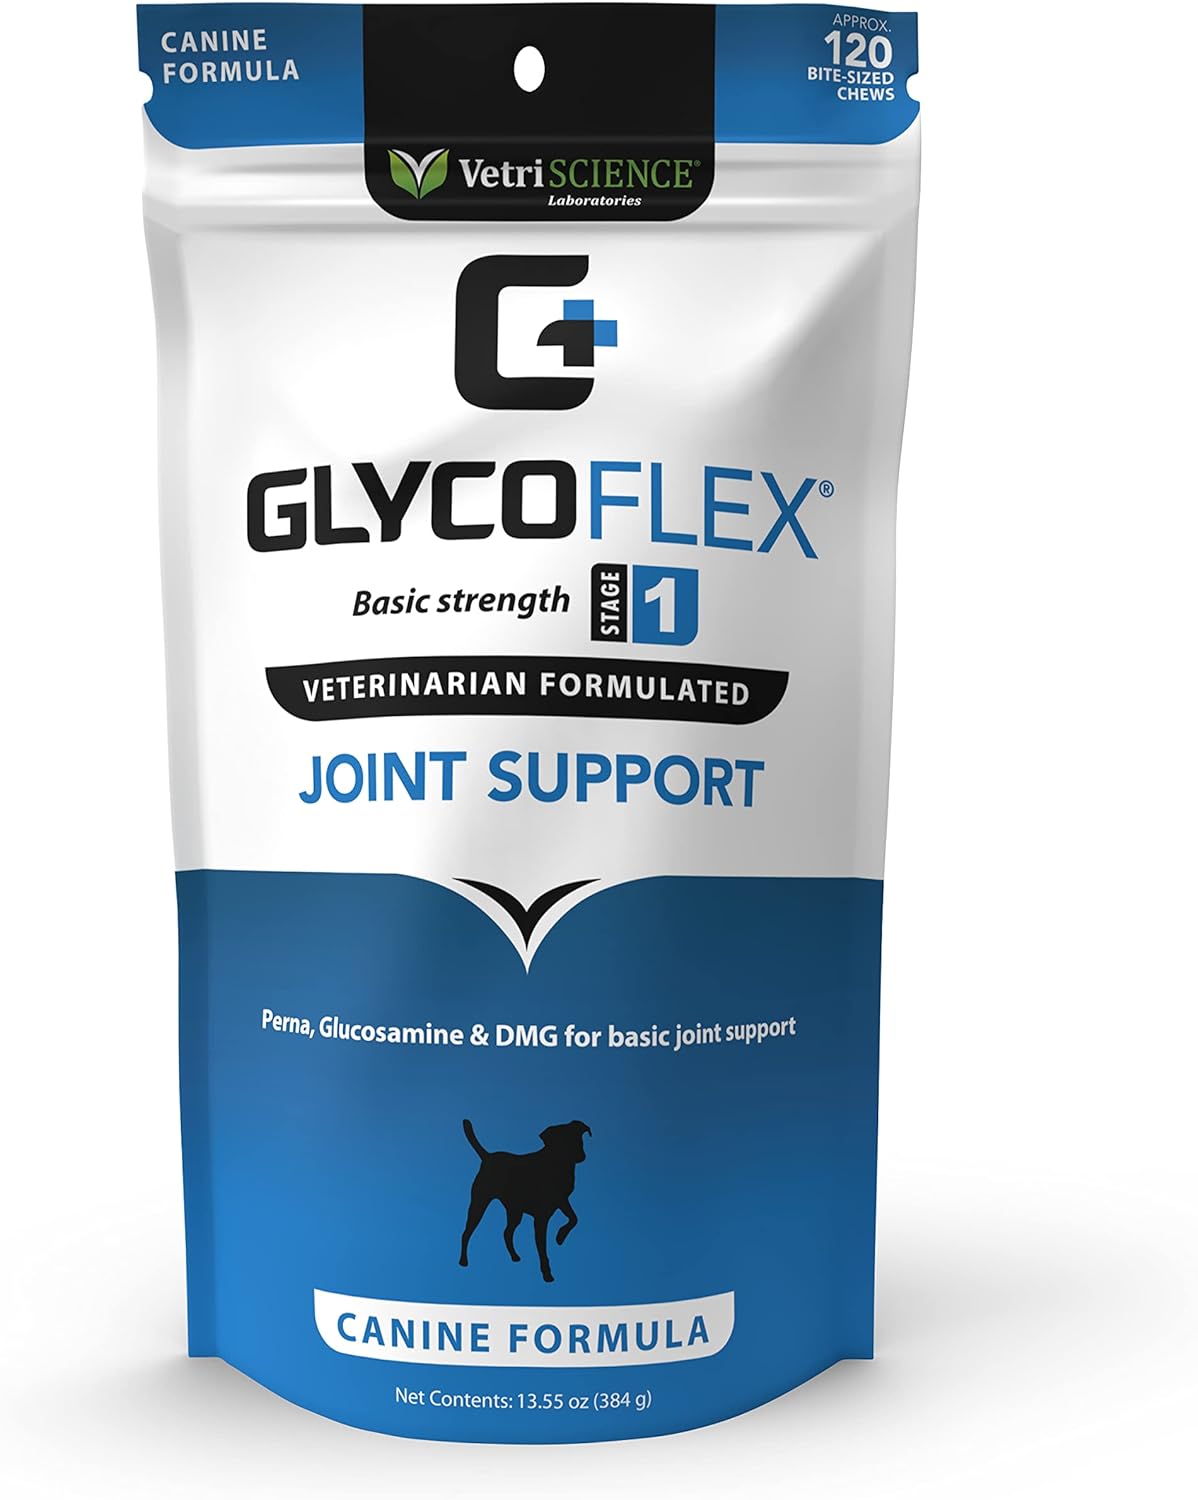 VETRISCIENCE GlycoFlex Stage 1 Hip and Joint Supplement for Dogs – Basic Joint Support Chews with Green Lipped Mussel, DMG, and Glucosamine for Dogs, Chicken Liver Flavor, 120 Bite-Sized Chews